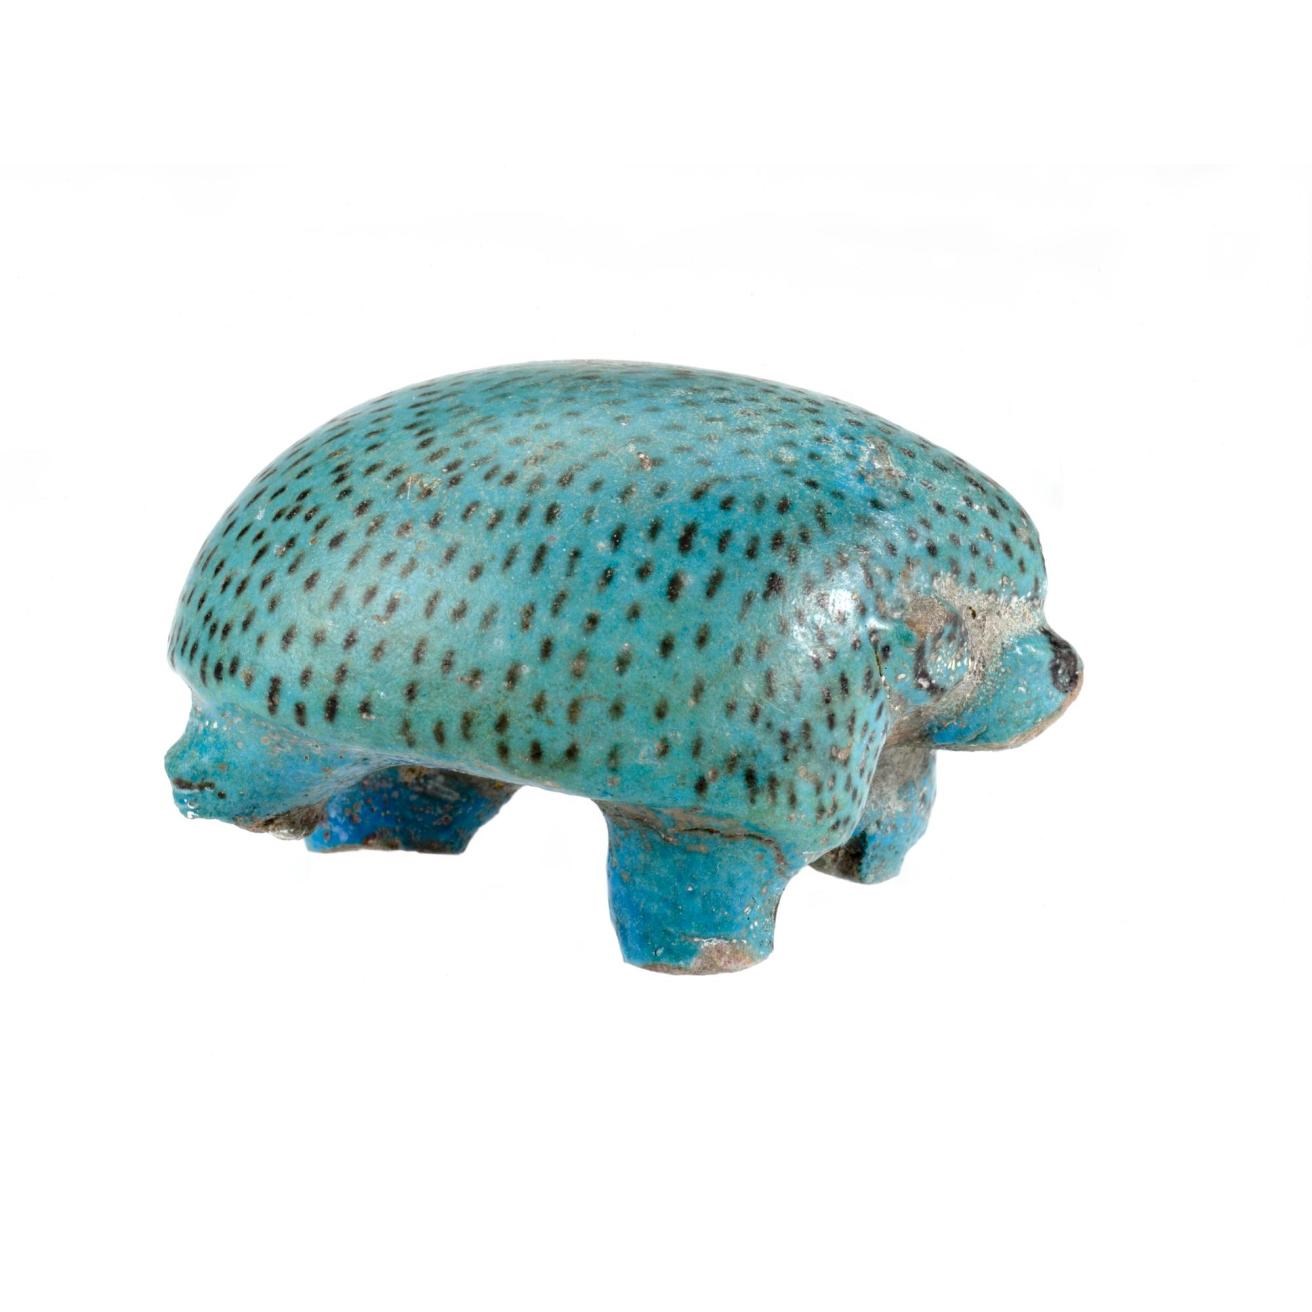  Figurine of a hedghog in a marching pose, made of blue faience with the quills indicated by brown flecks: Ancient Egyptian, Middle Kingdom.